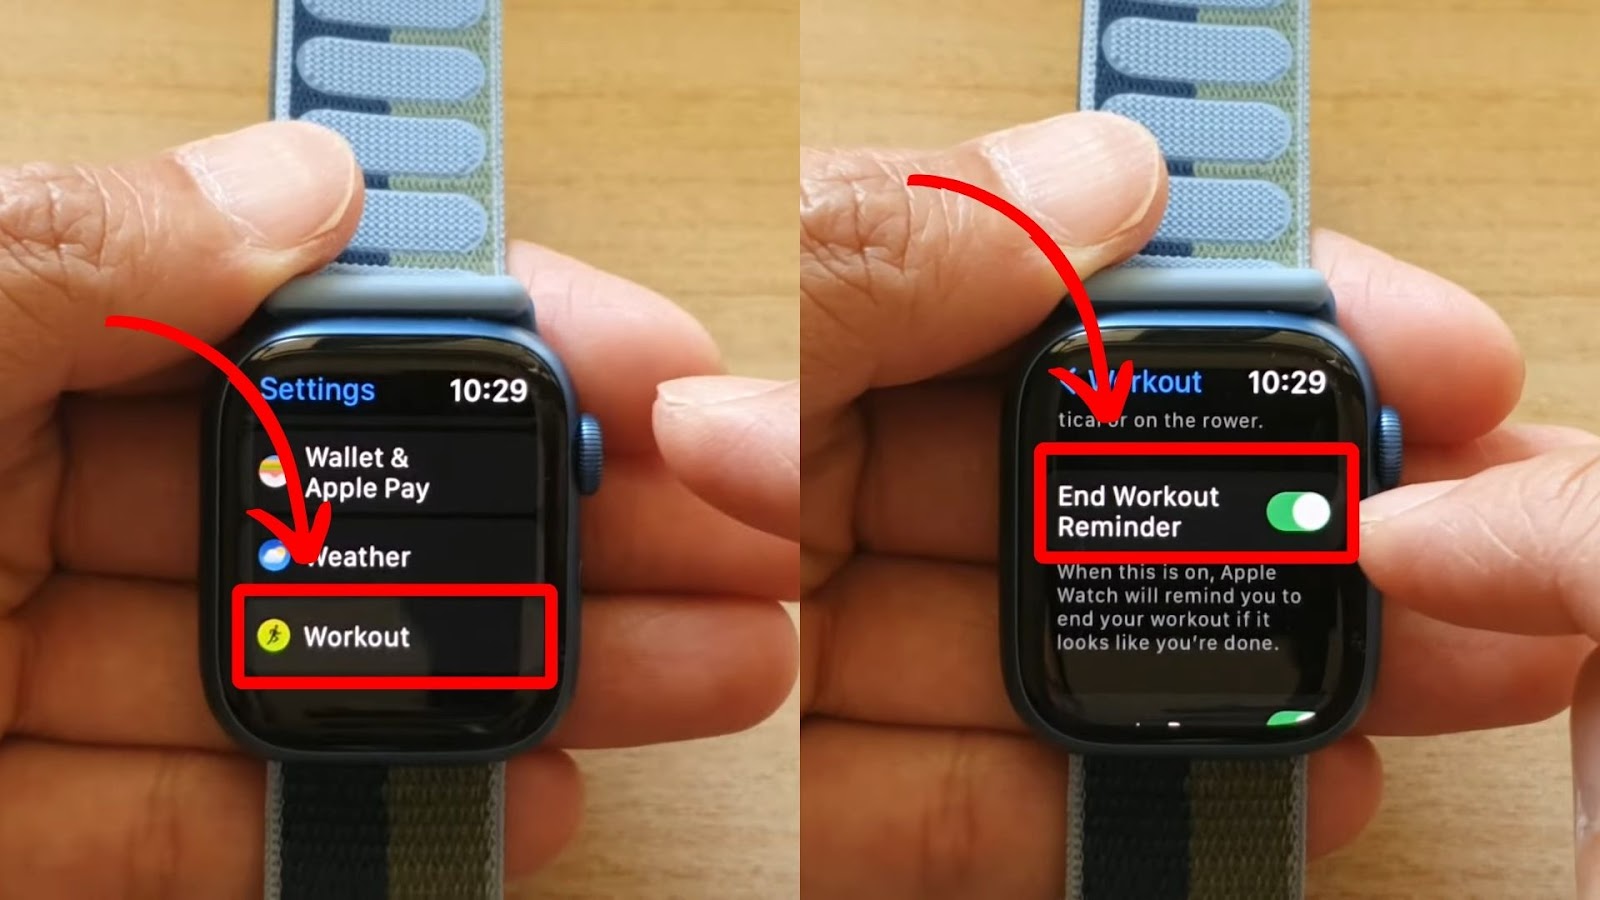 How To Disable End Workout Reminder On Apple Watch